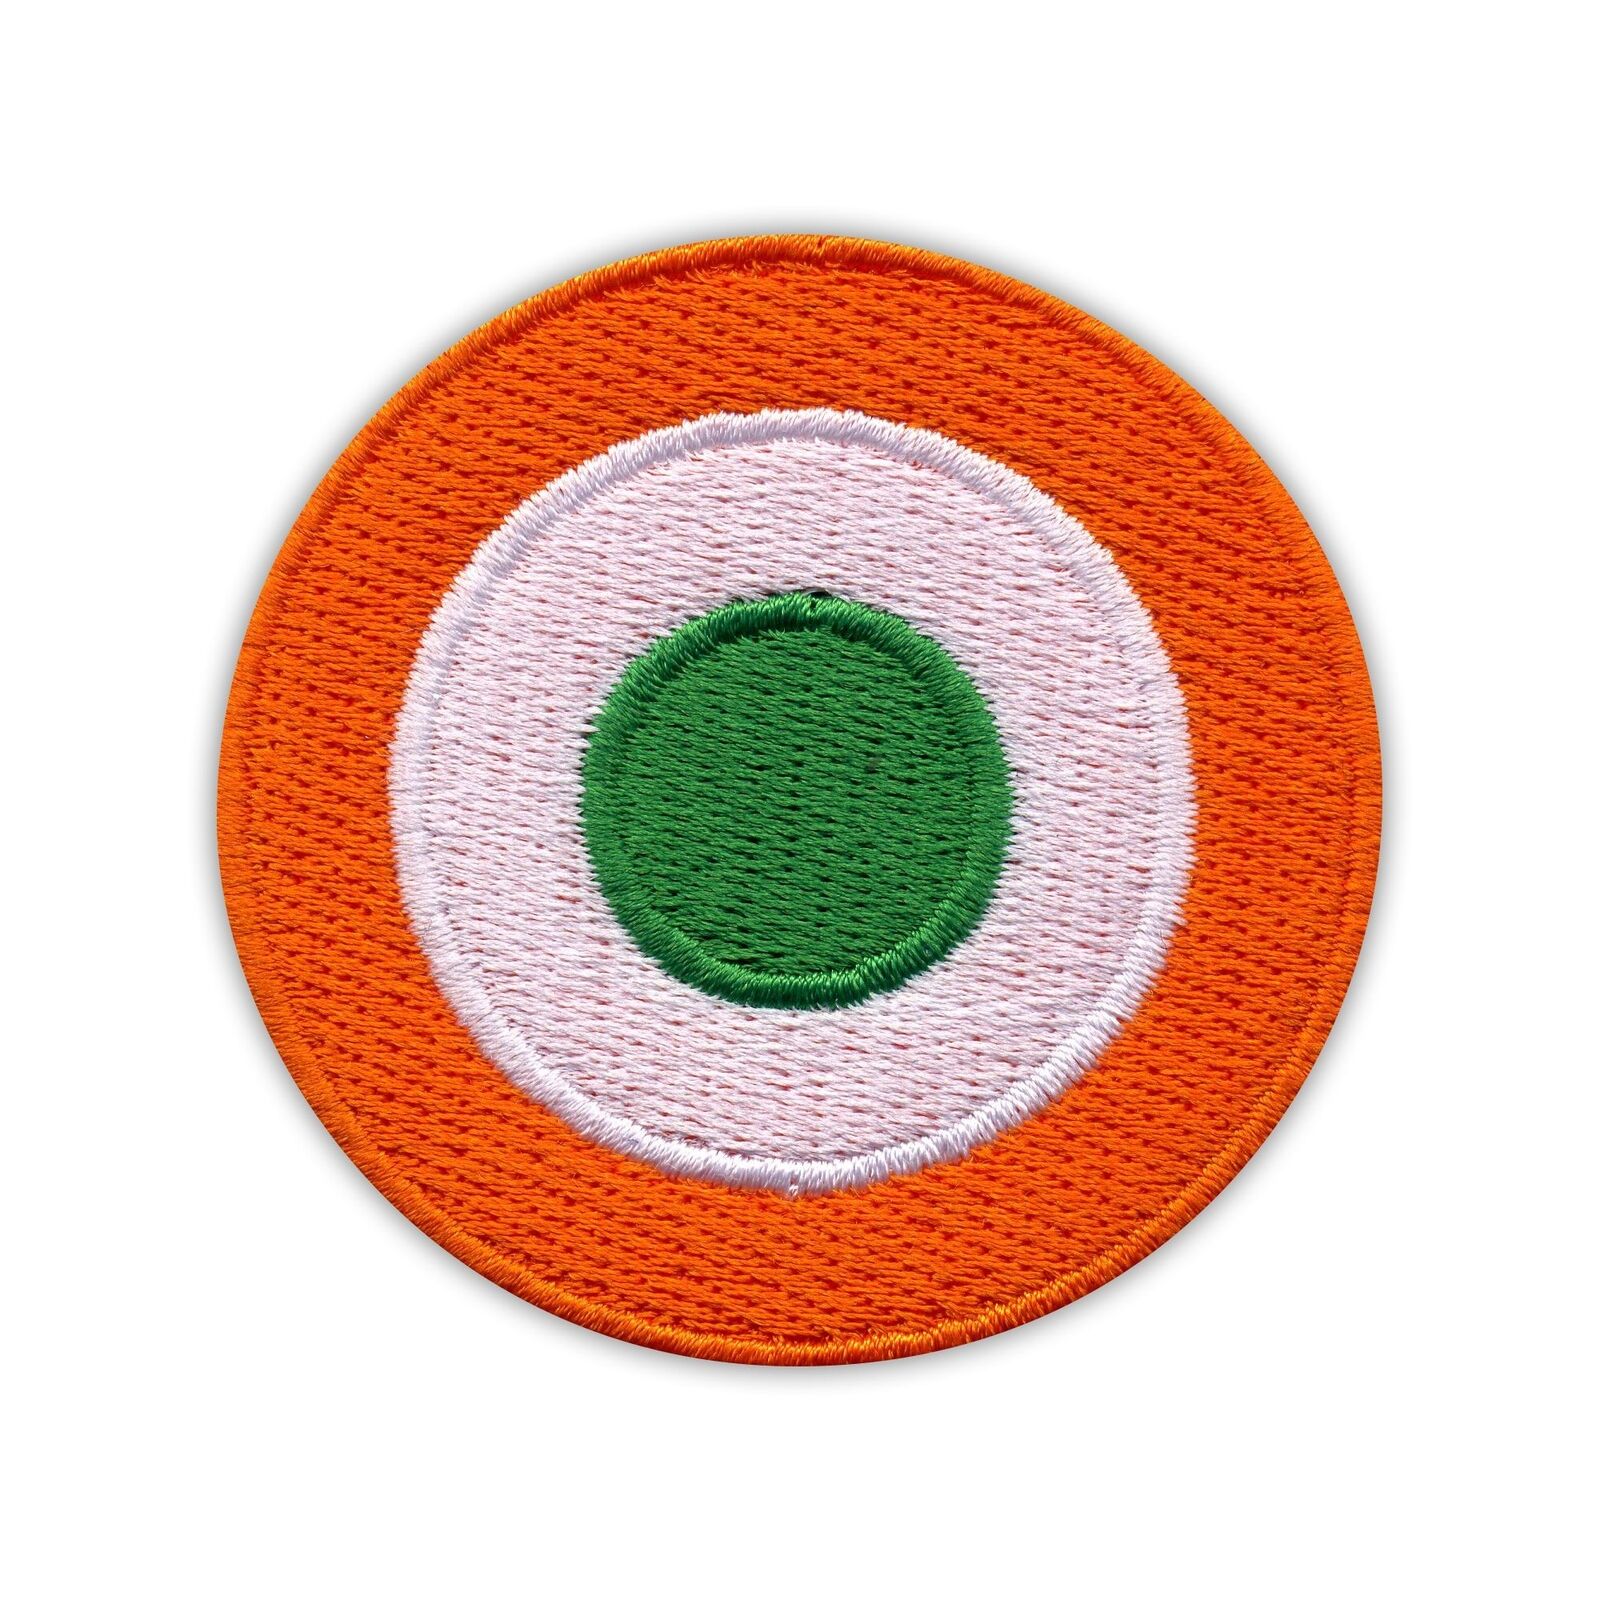 Indian Air Force - Roundel Patch/Badge Embroidered